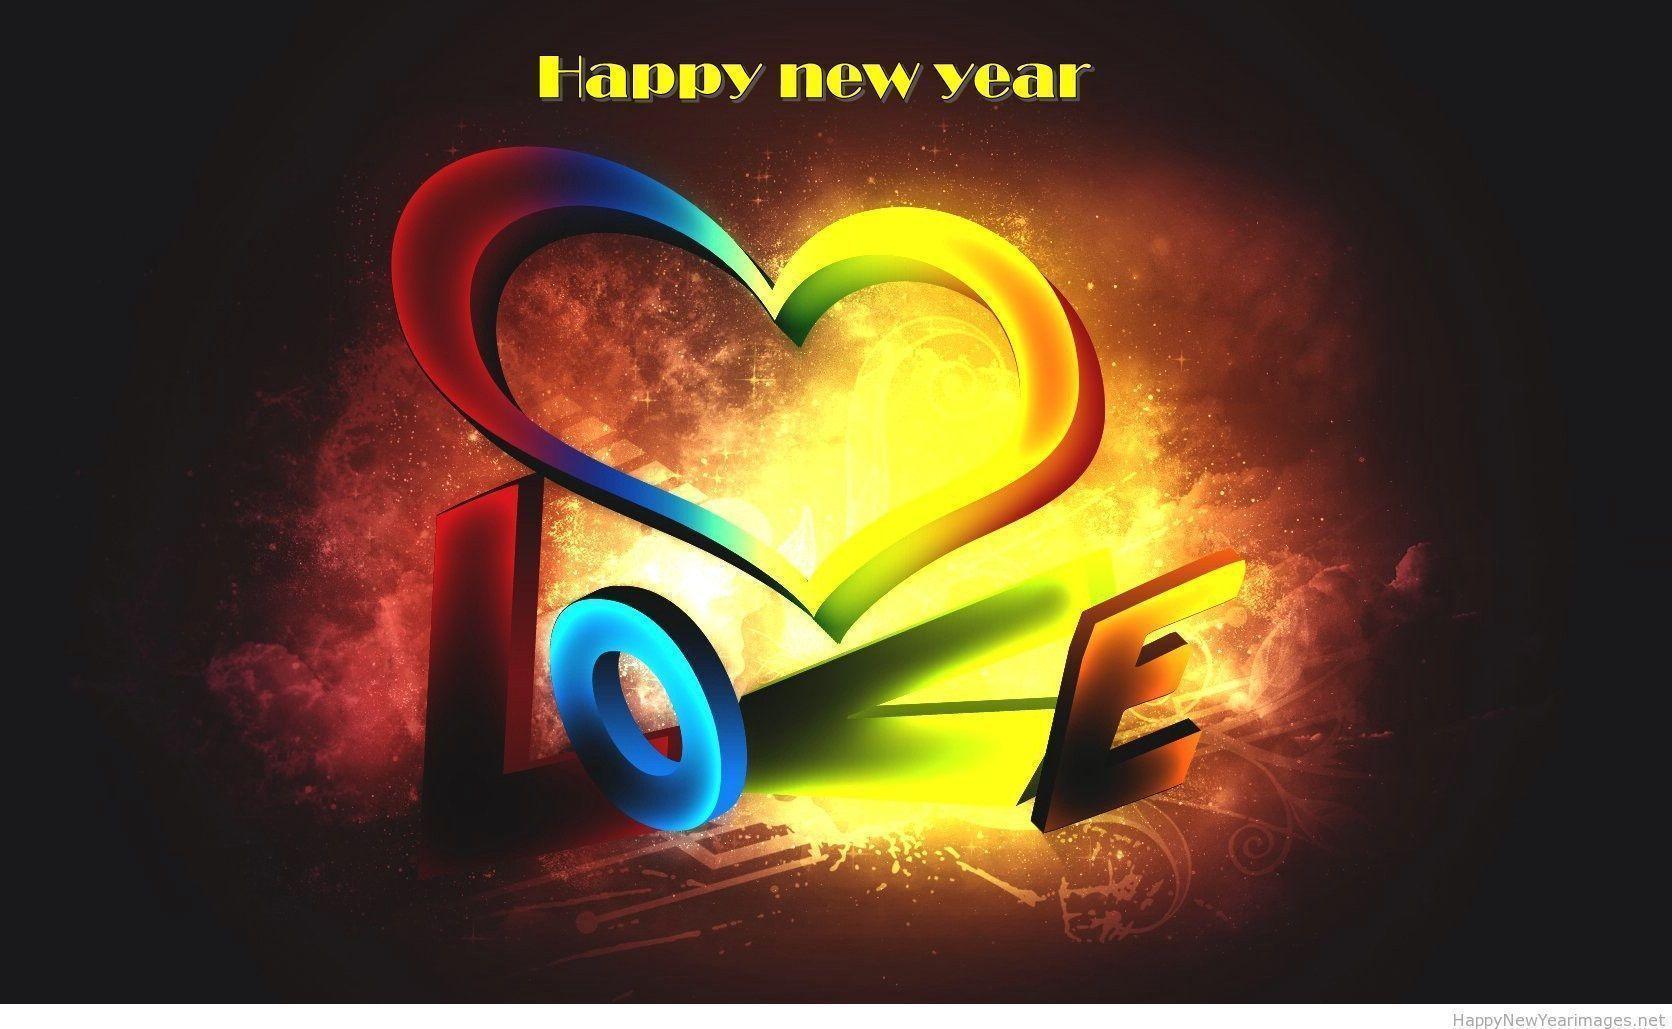 Awesome 3D Wallpaper happy new year 2015 with love